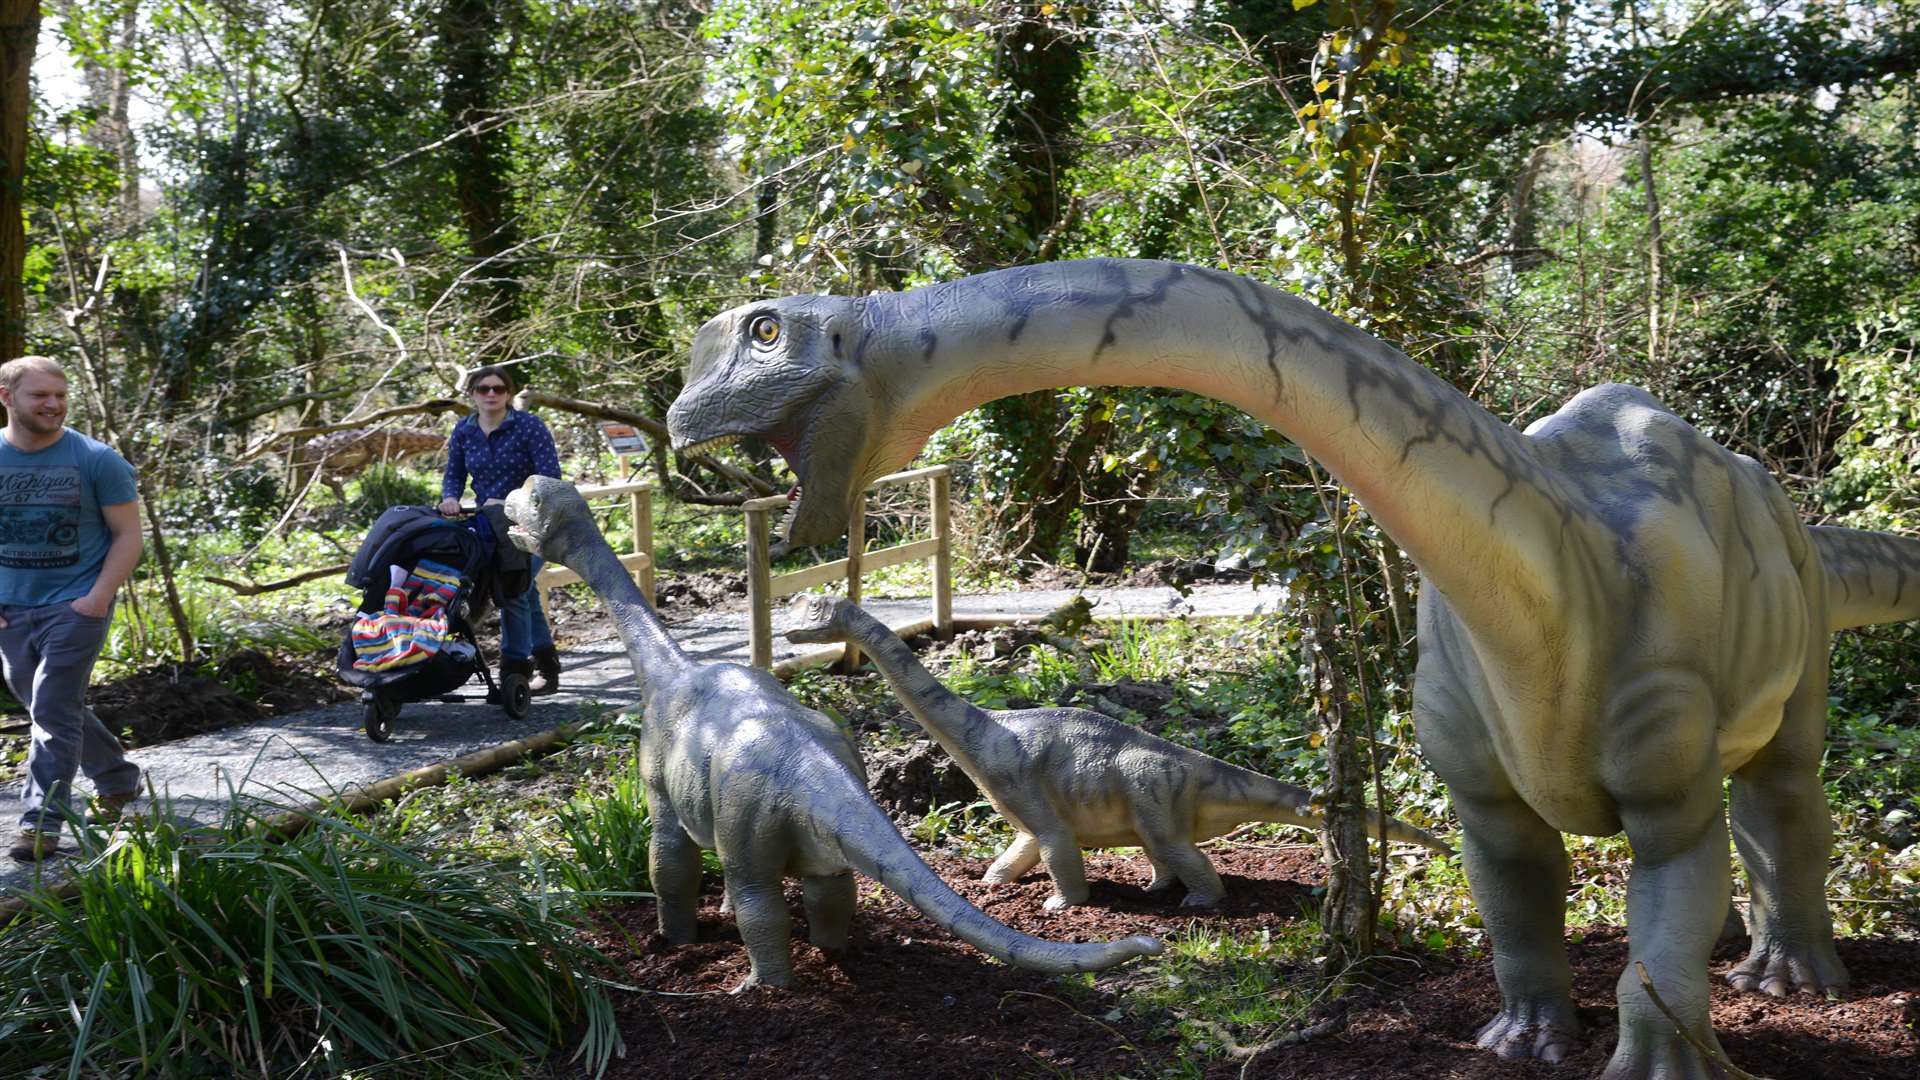 Families are now able to visit Port Lympne's dinosaurs